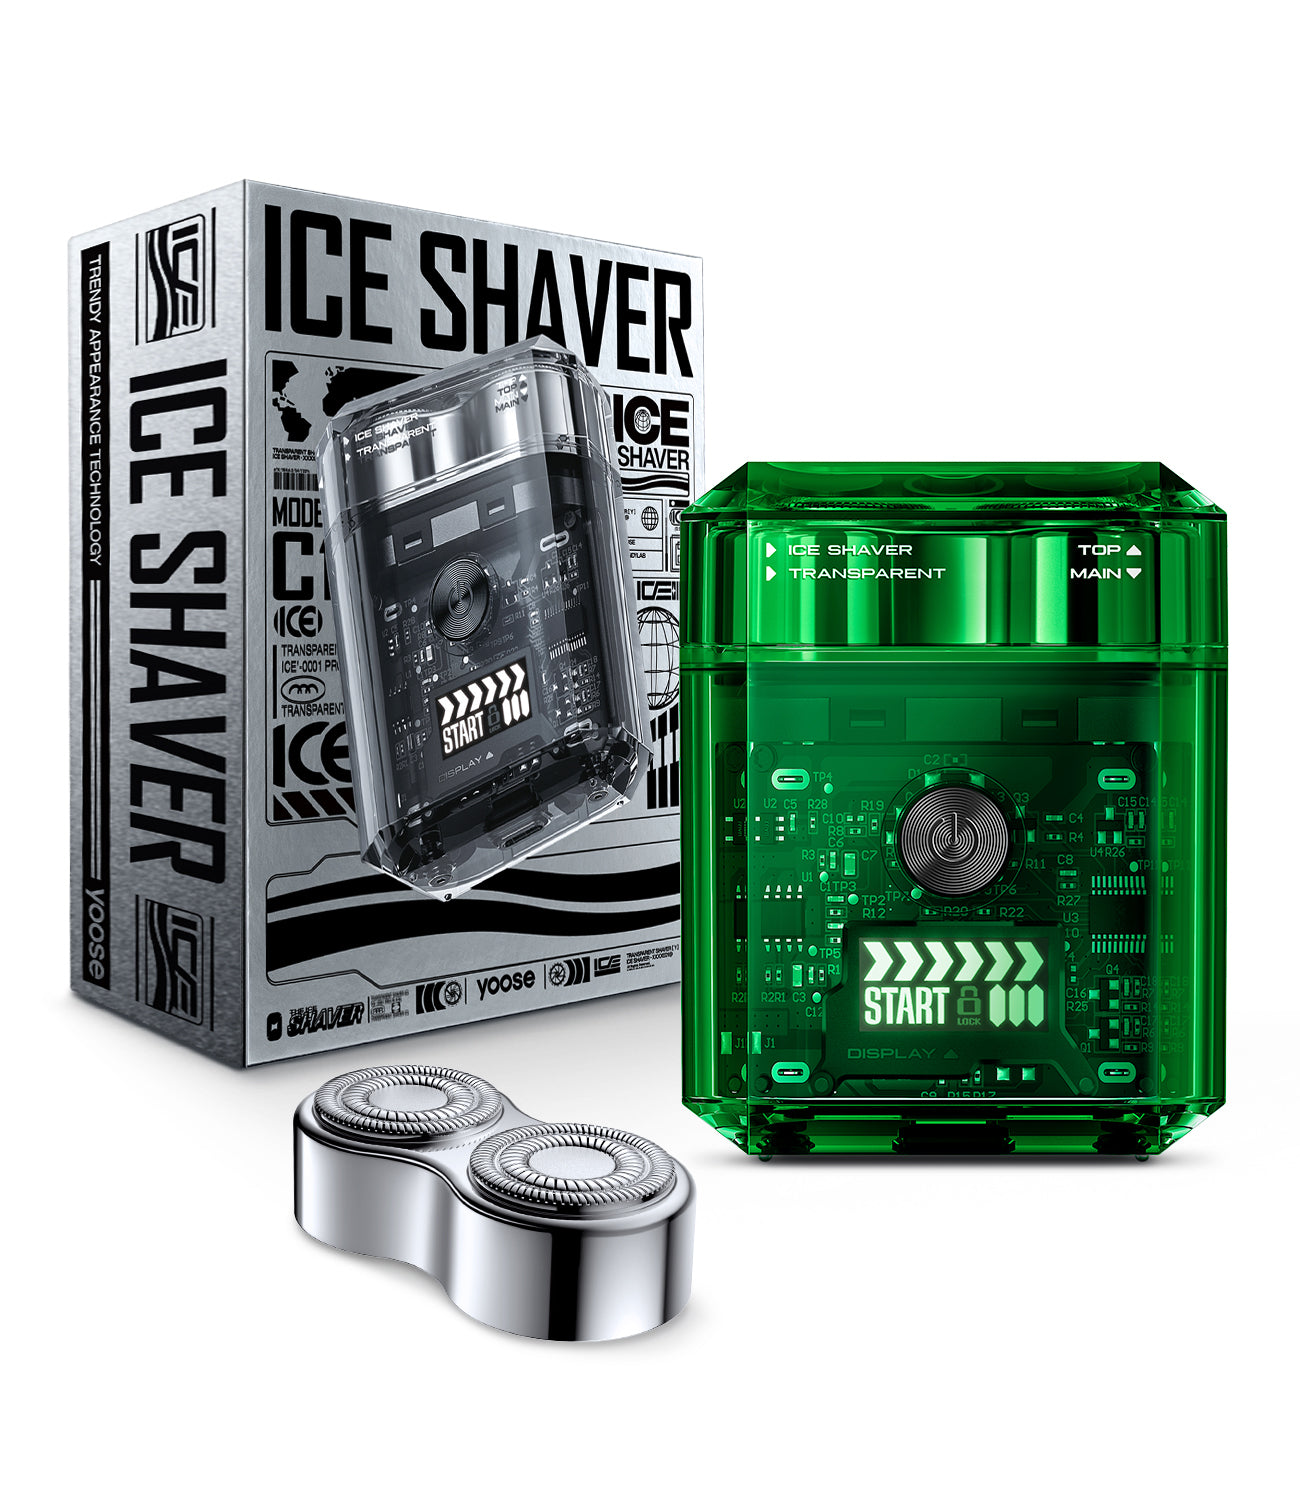 Which type of shaver is more suitable for sensitive skin?